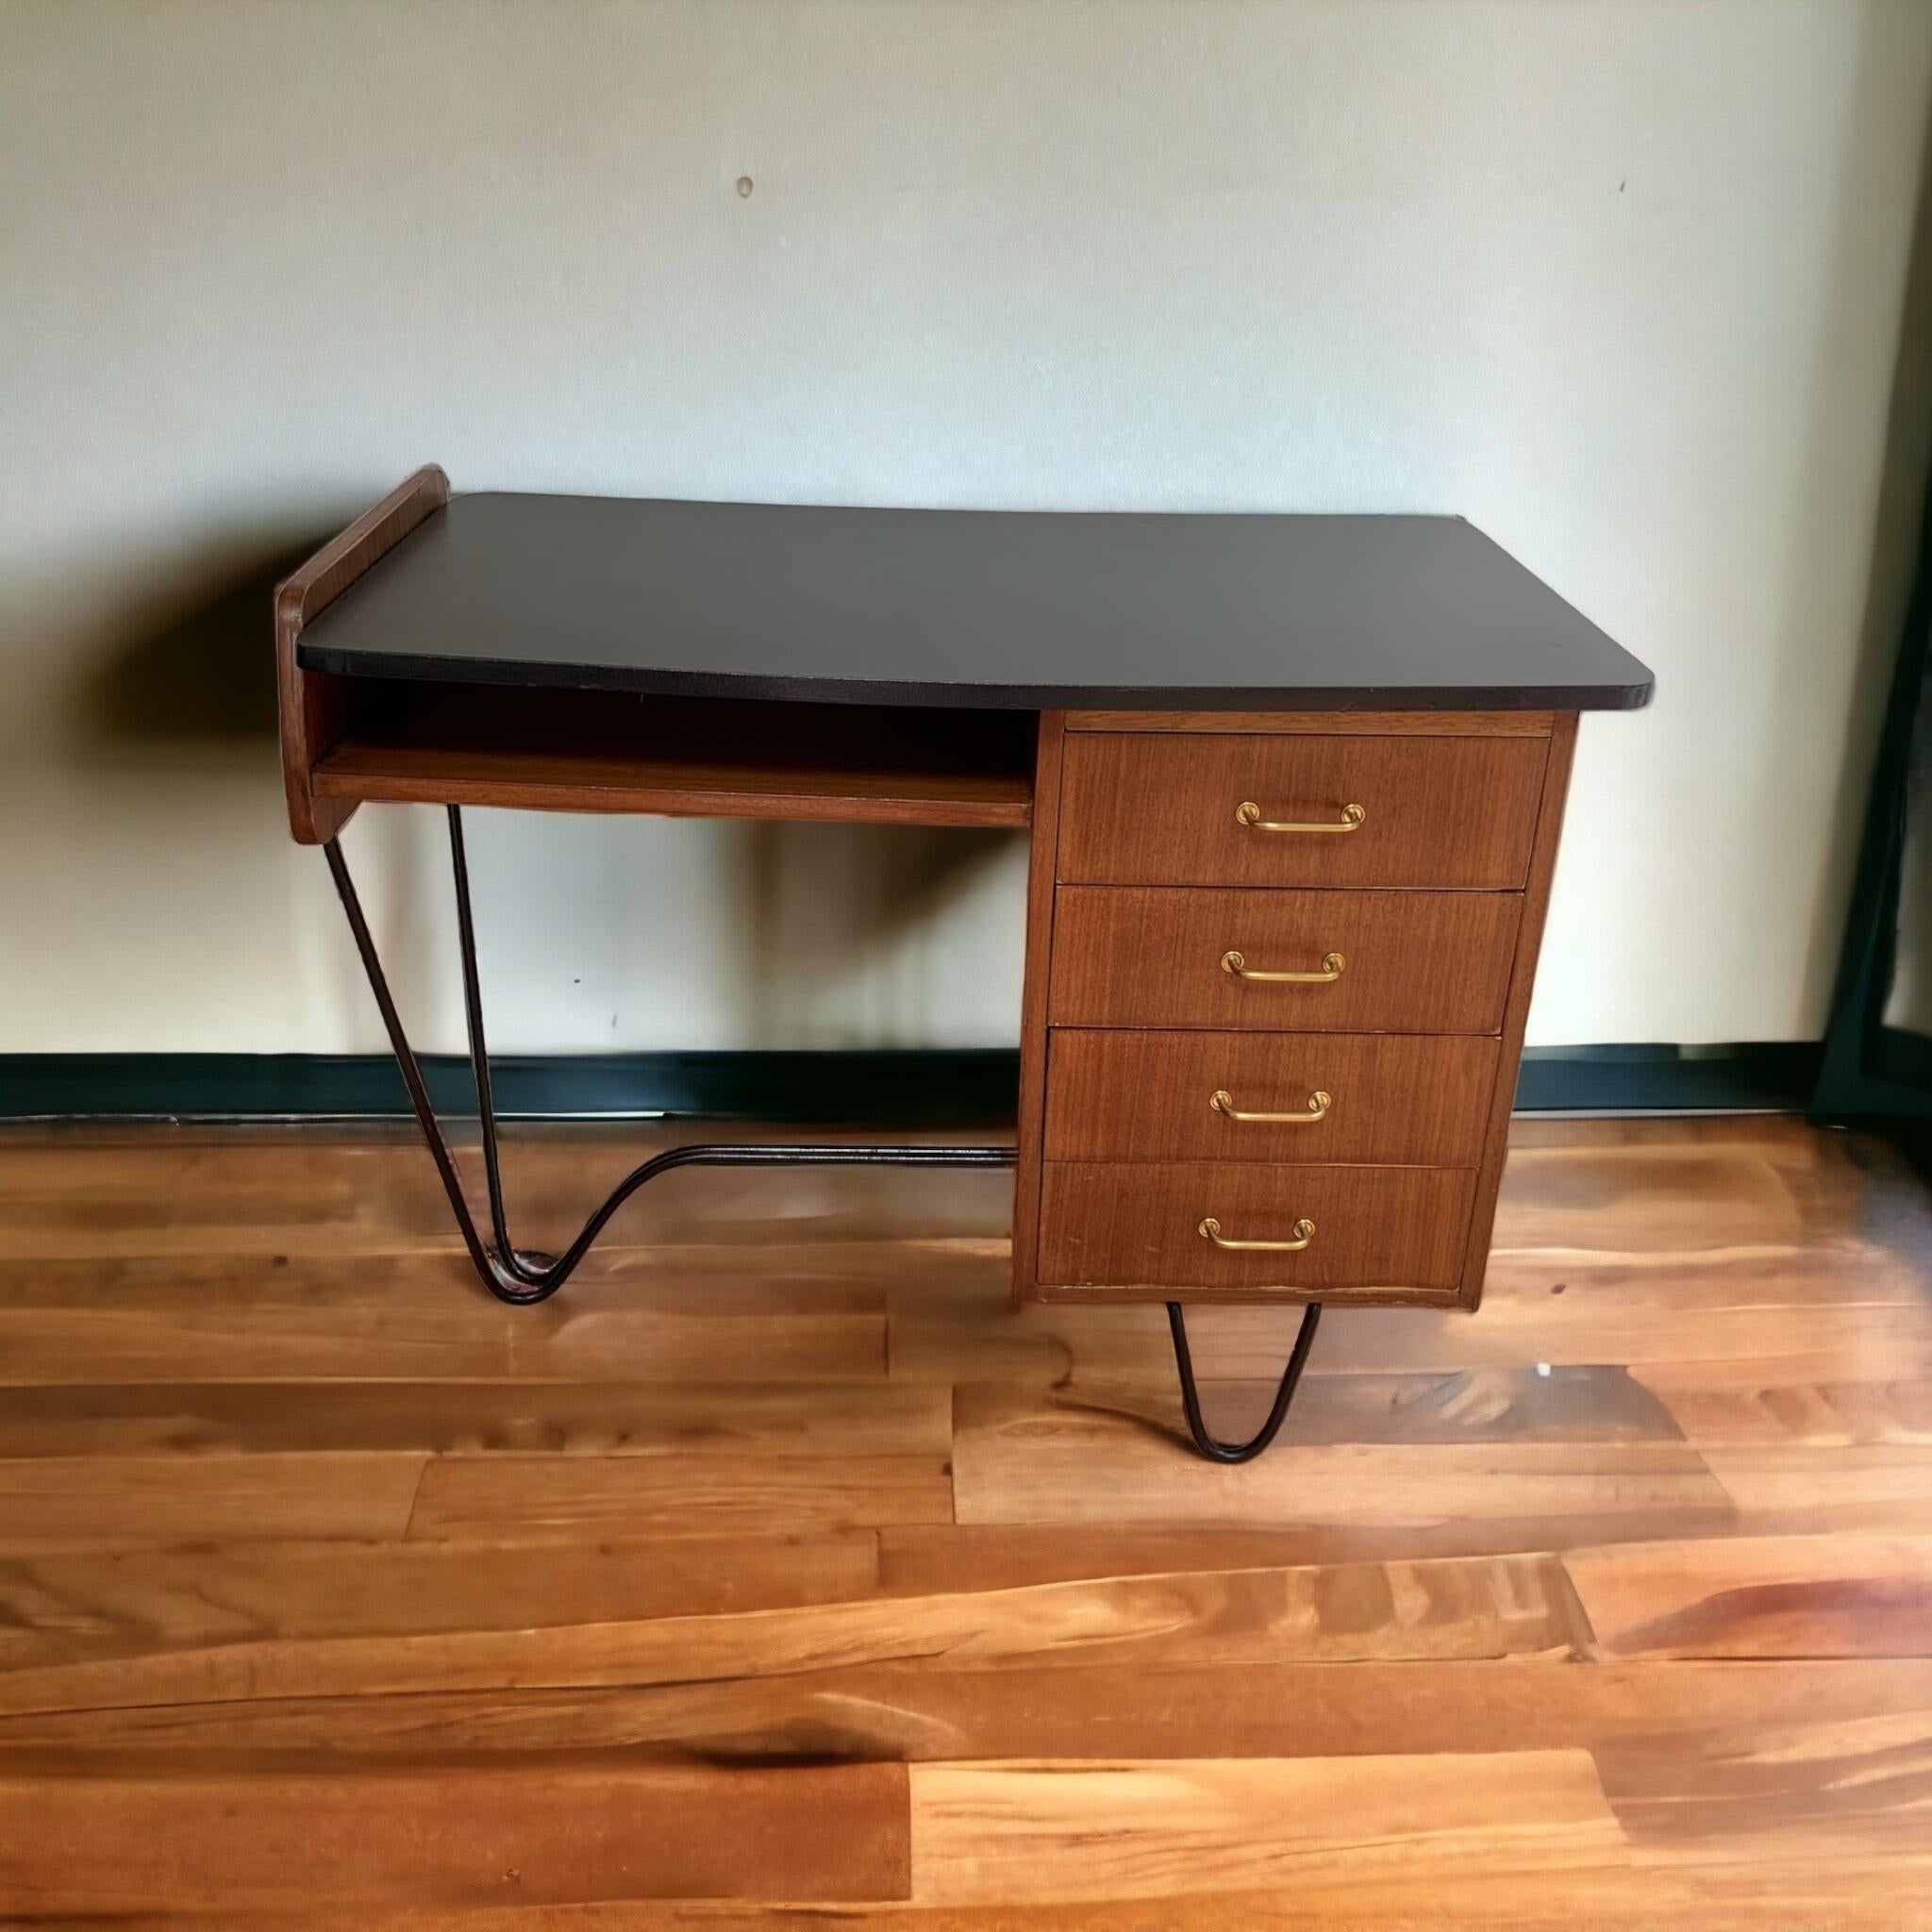  Small modernist style desk in wood and steel, tubular leg and brass wrist, some signs of wear and tear on the bottom of the drawer, see photos for faults

Welcome to the world of modernism with this small desk with a clean and elegant design,